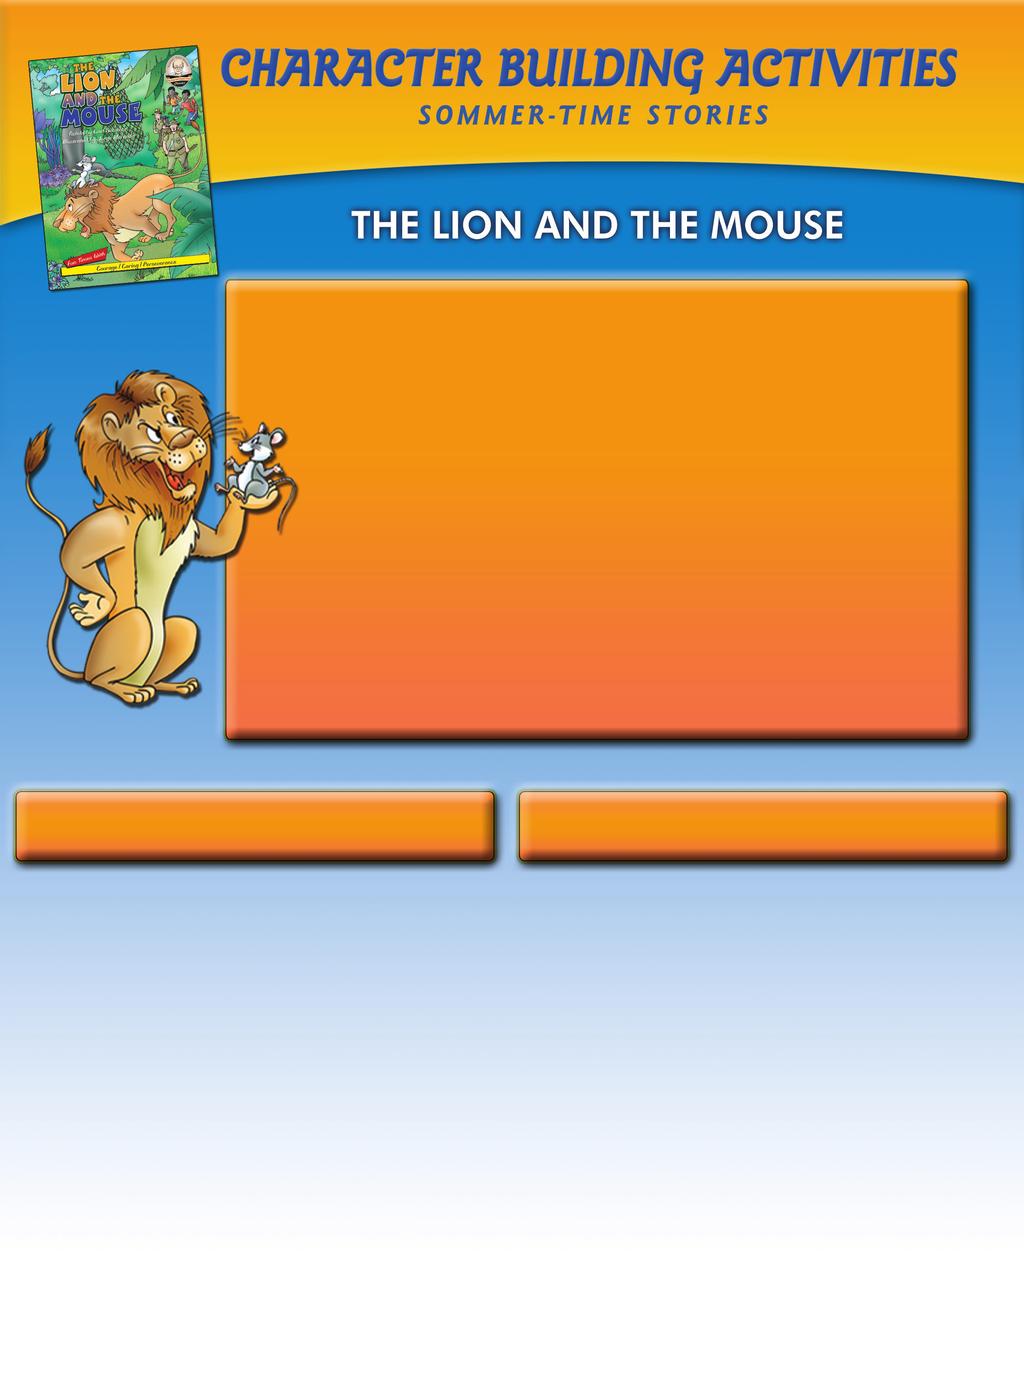 Story Description Bitsie the mouse has a difficult time finding food for her family, so she decides to move by Leo the lion s den. Bitsie gets caught while getting too curious.